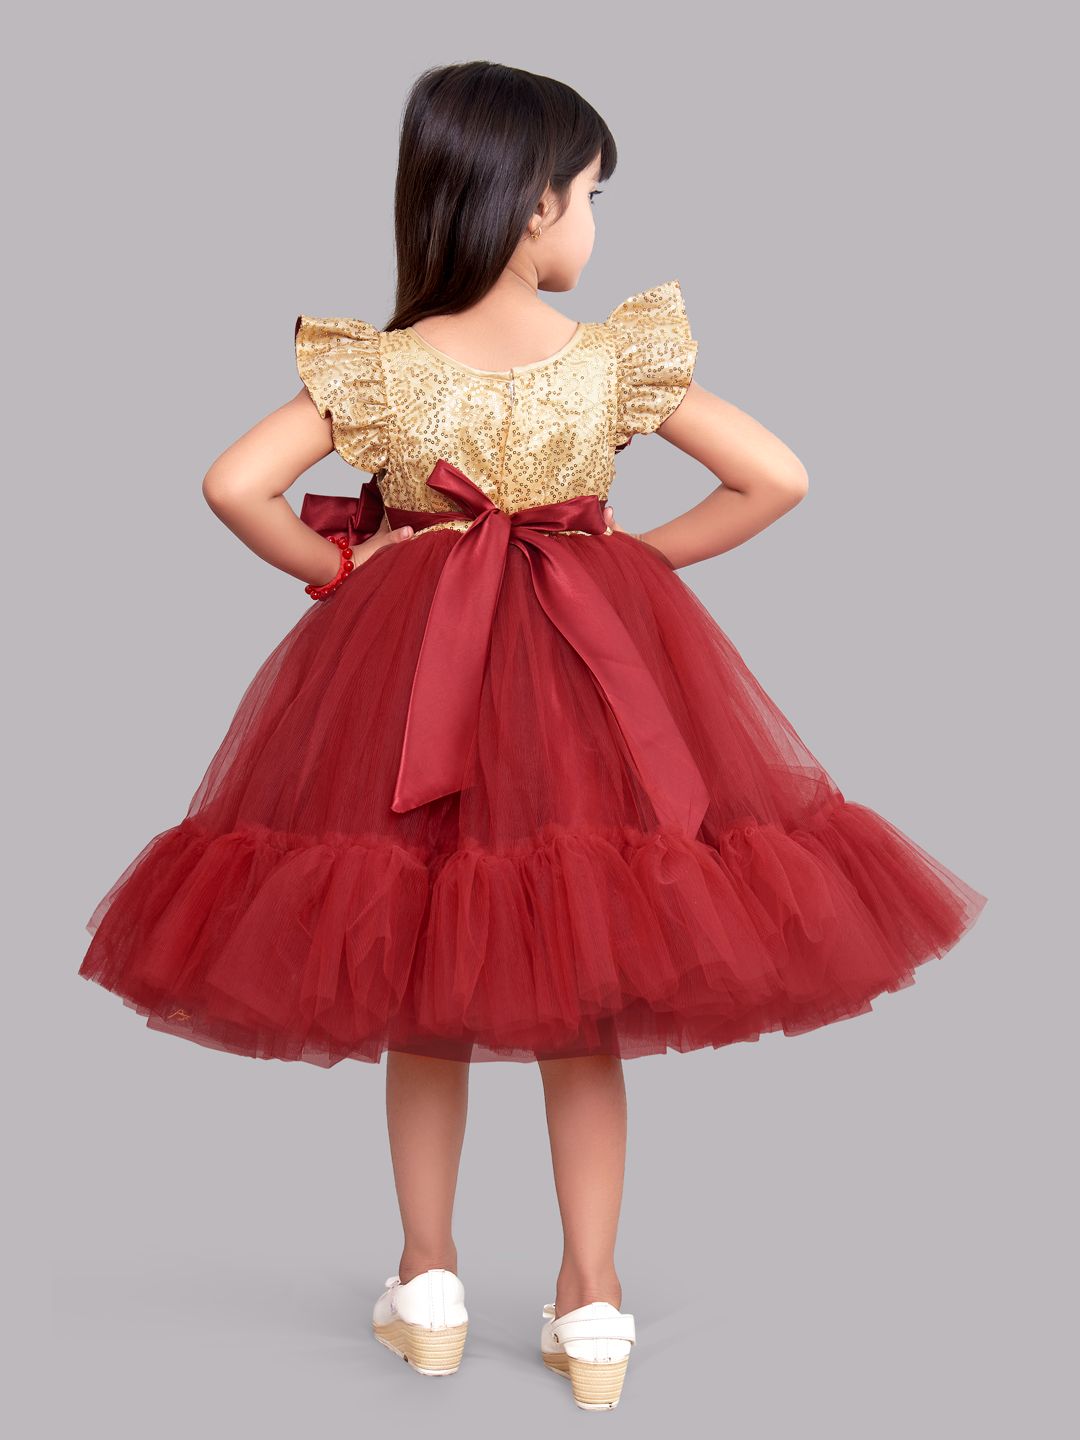 Sequins Gold and Red Tulle Dress